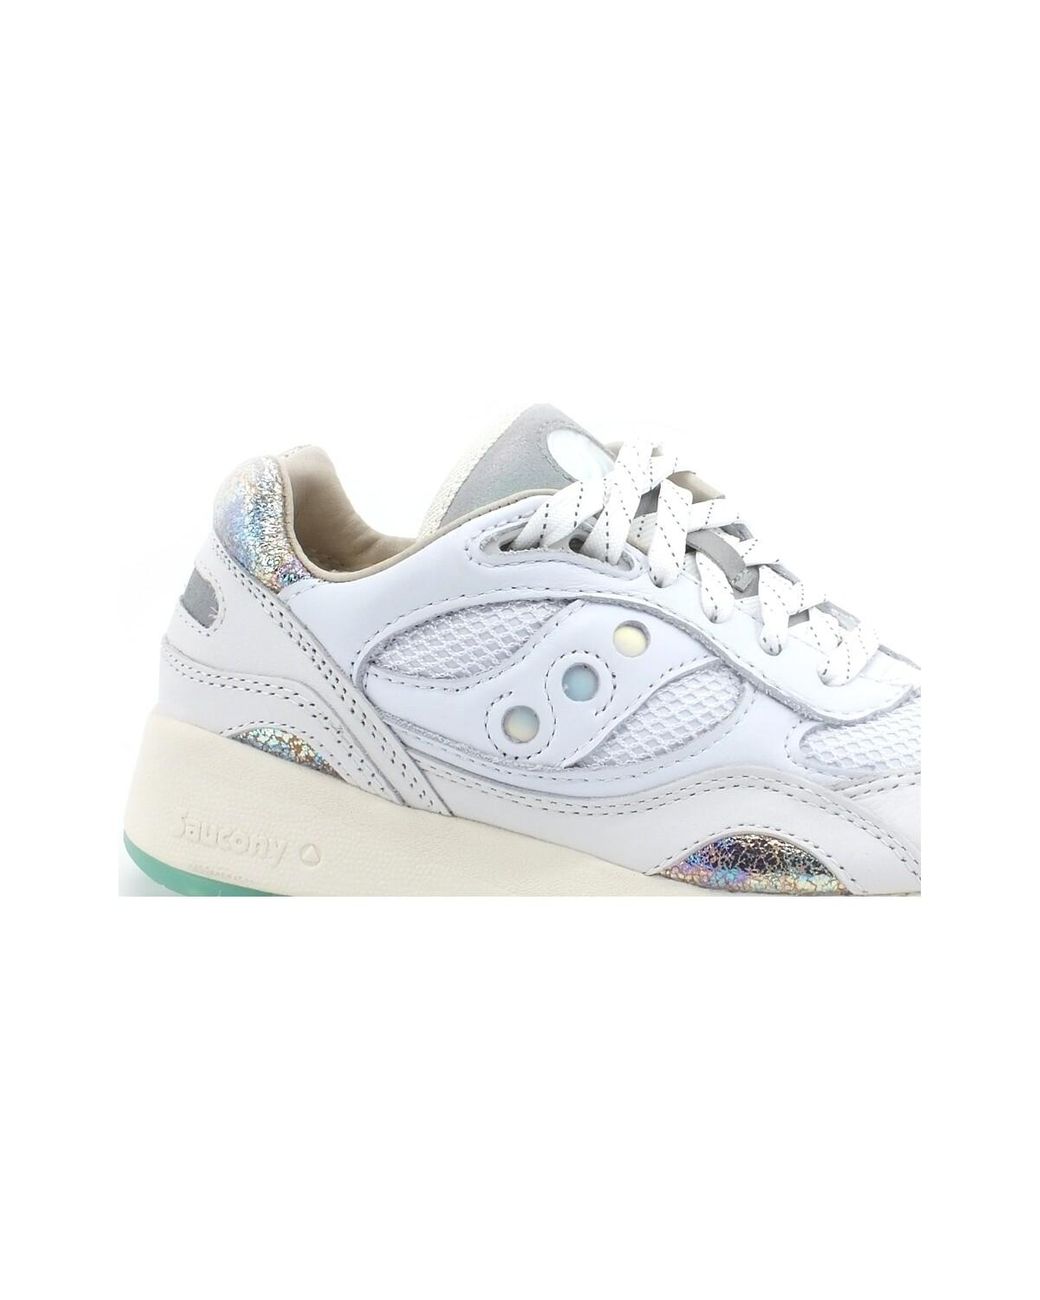 Bottines Shadow 6000 Pearl Sneaker White Pearl S70594-1 Saucony | Lyst